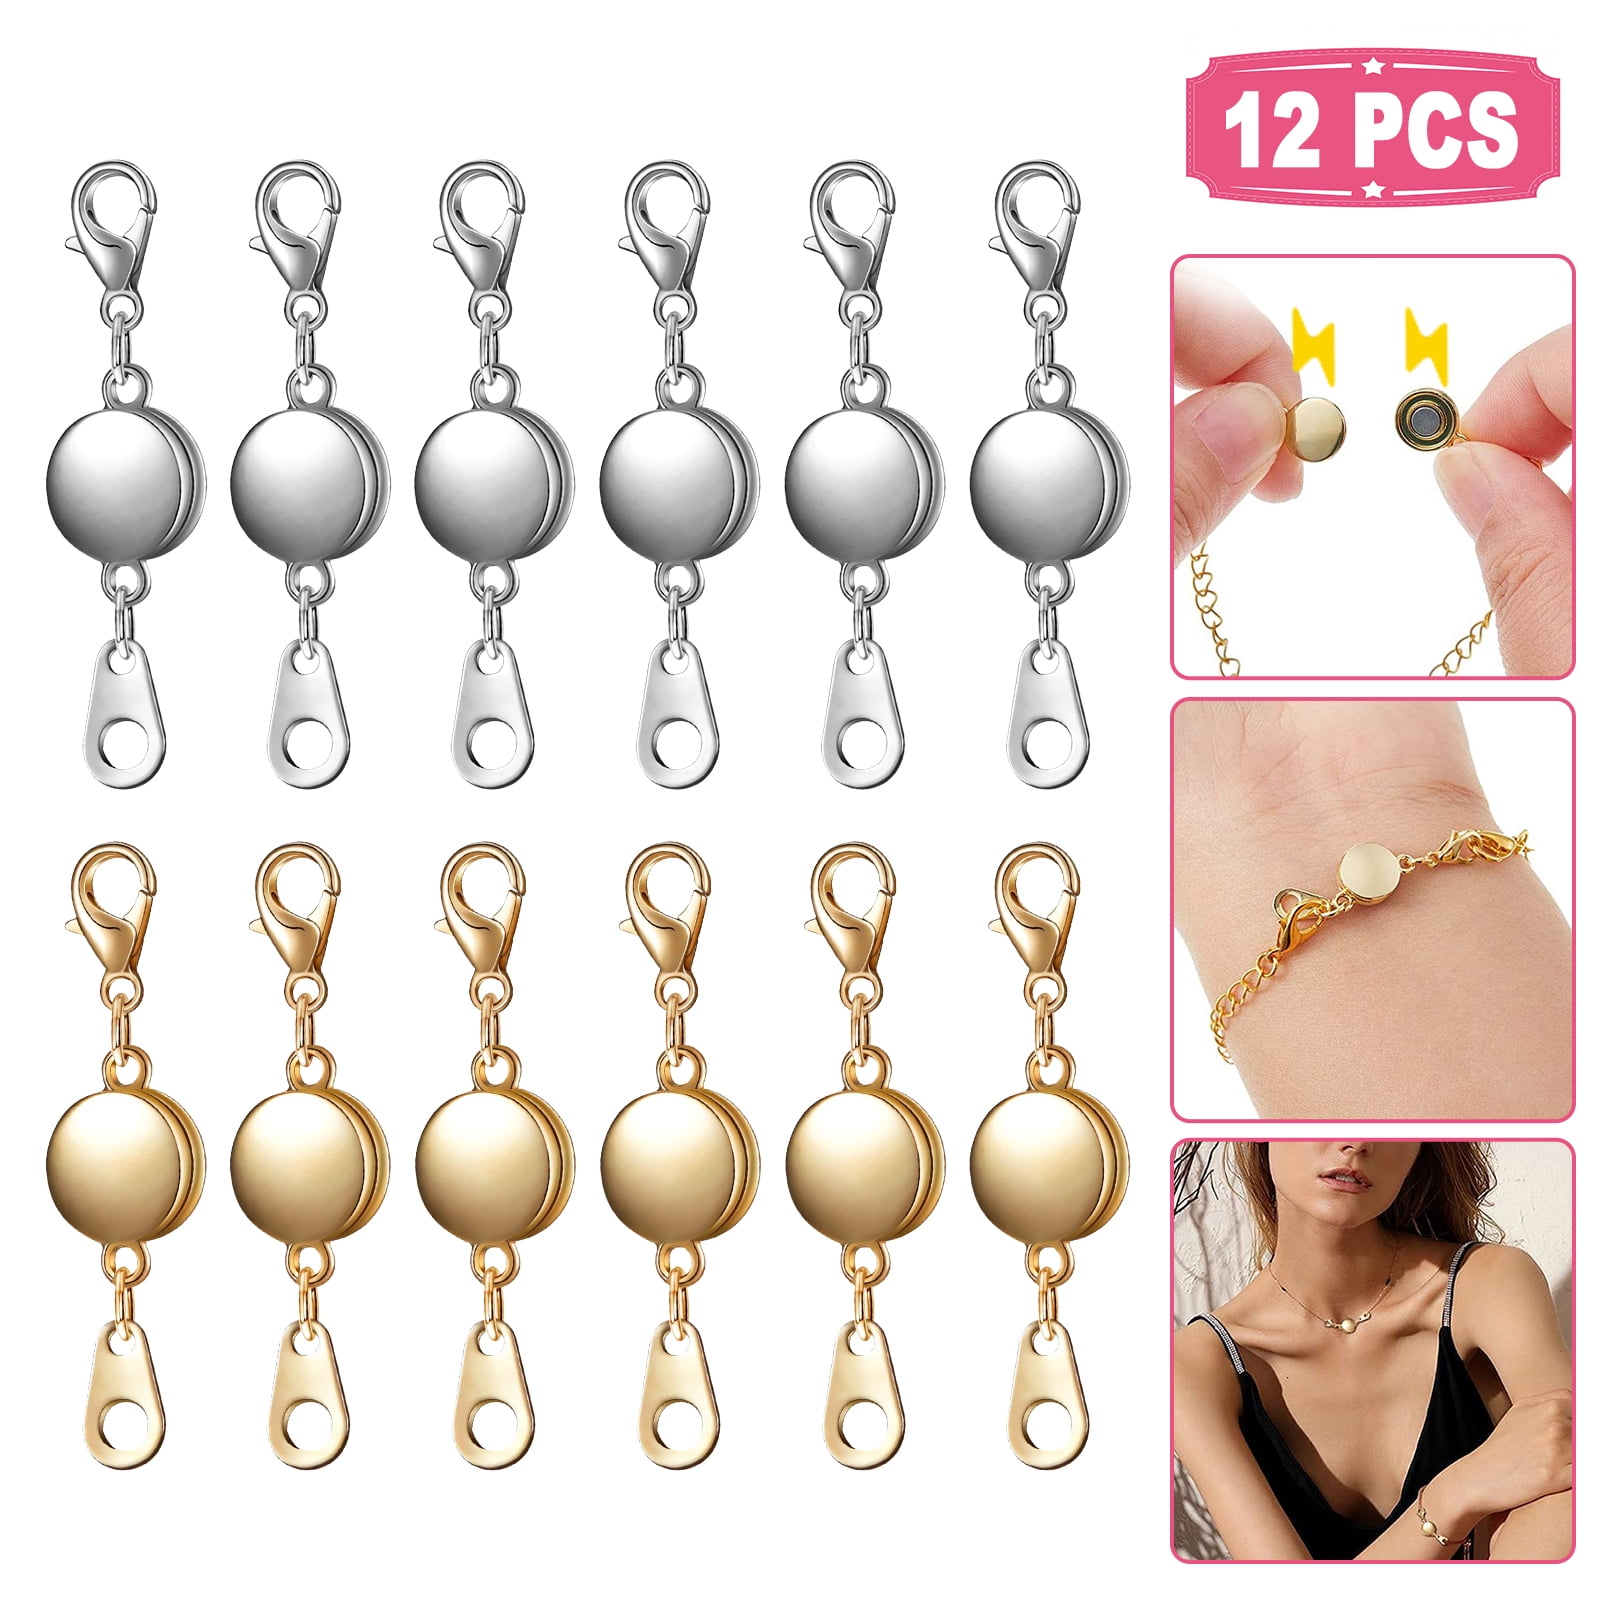 40PCS Necklace Clasp Magnetic Jewelry Locking Clasps and Closures Bracelet